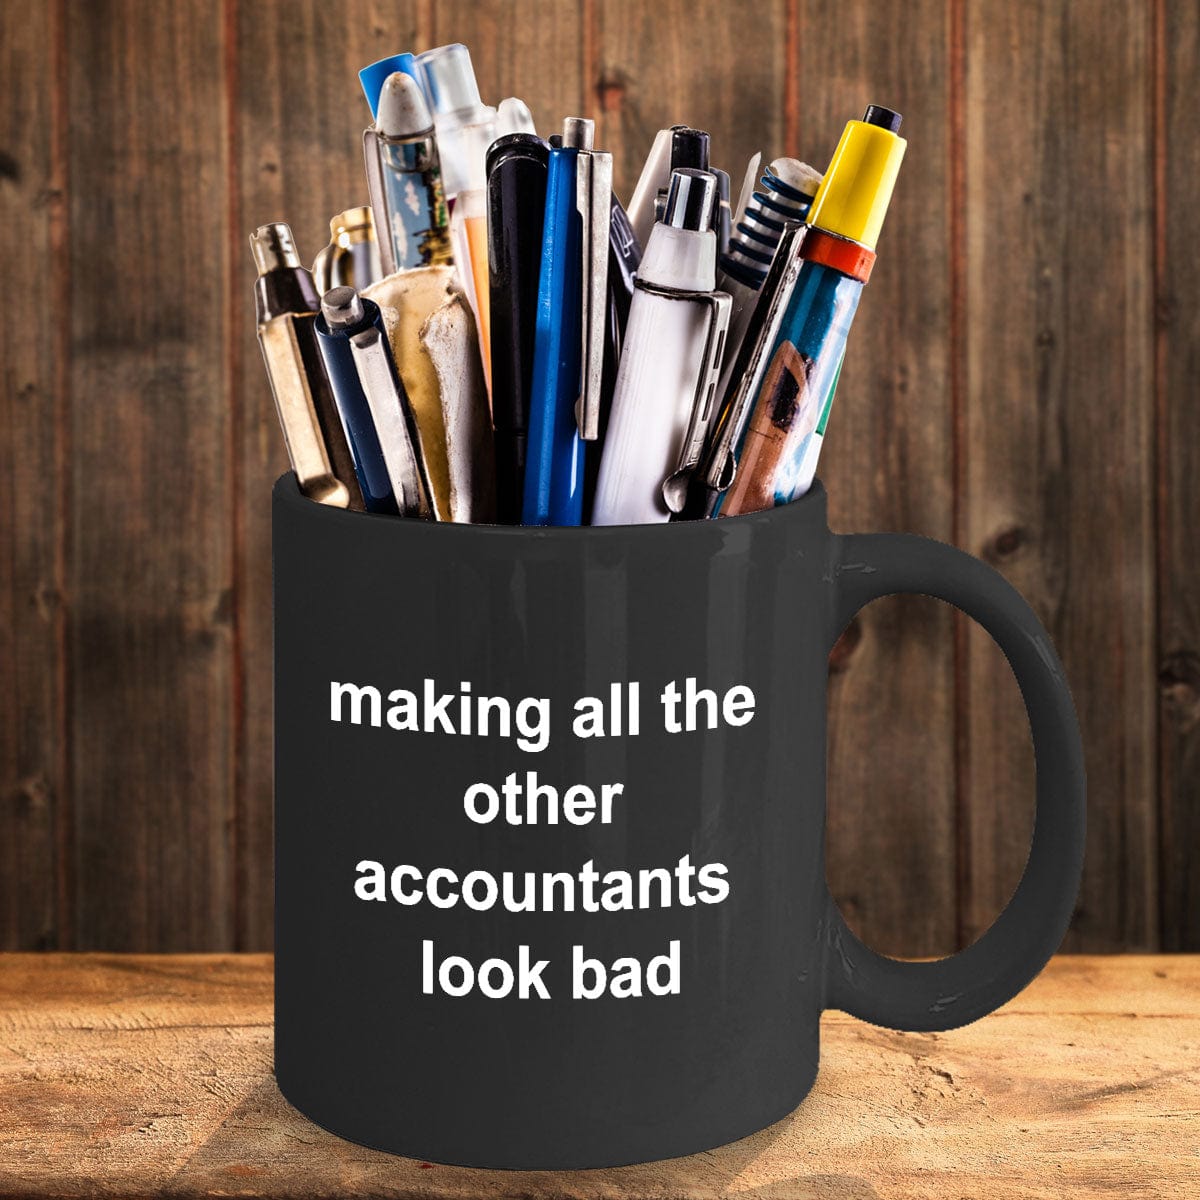 Funny Accounting Black Ceramic Coffee Mug - Making All the Other Accountants Look Bad